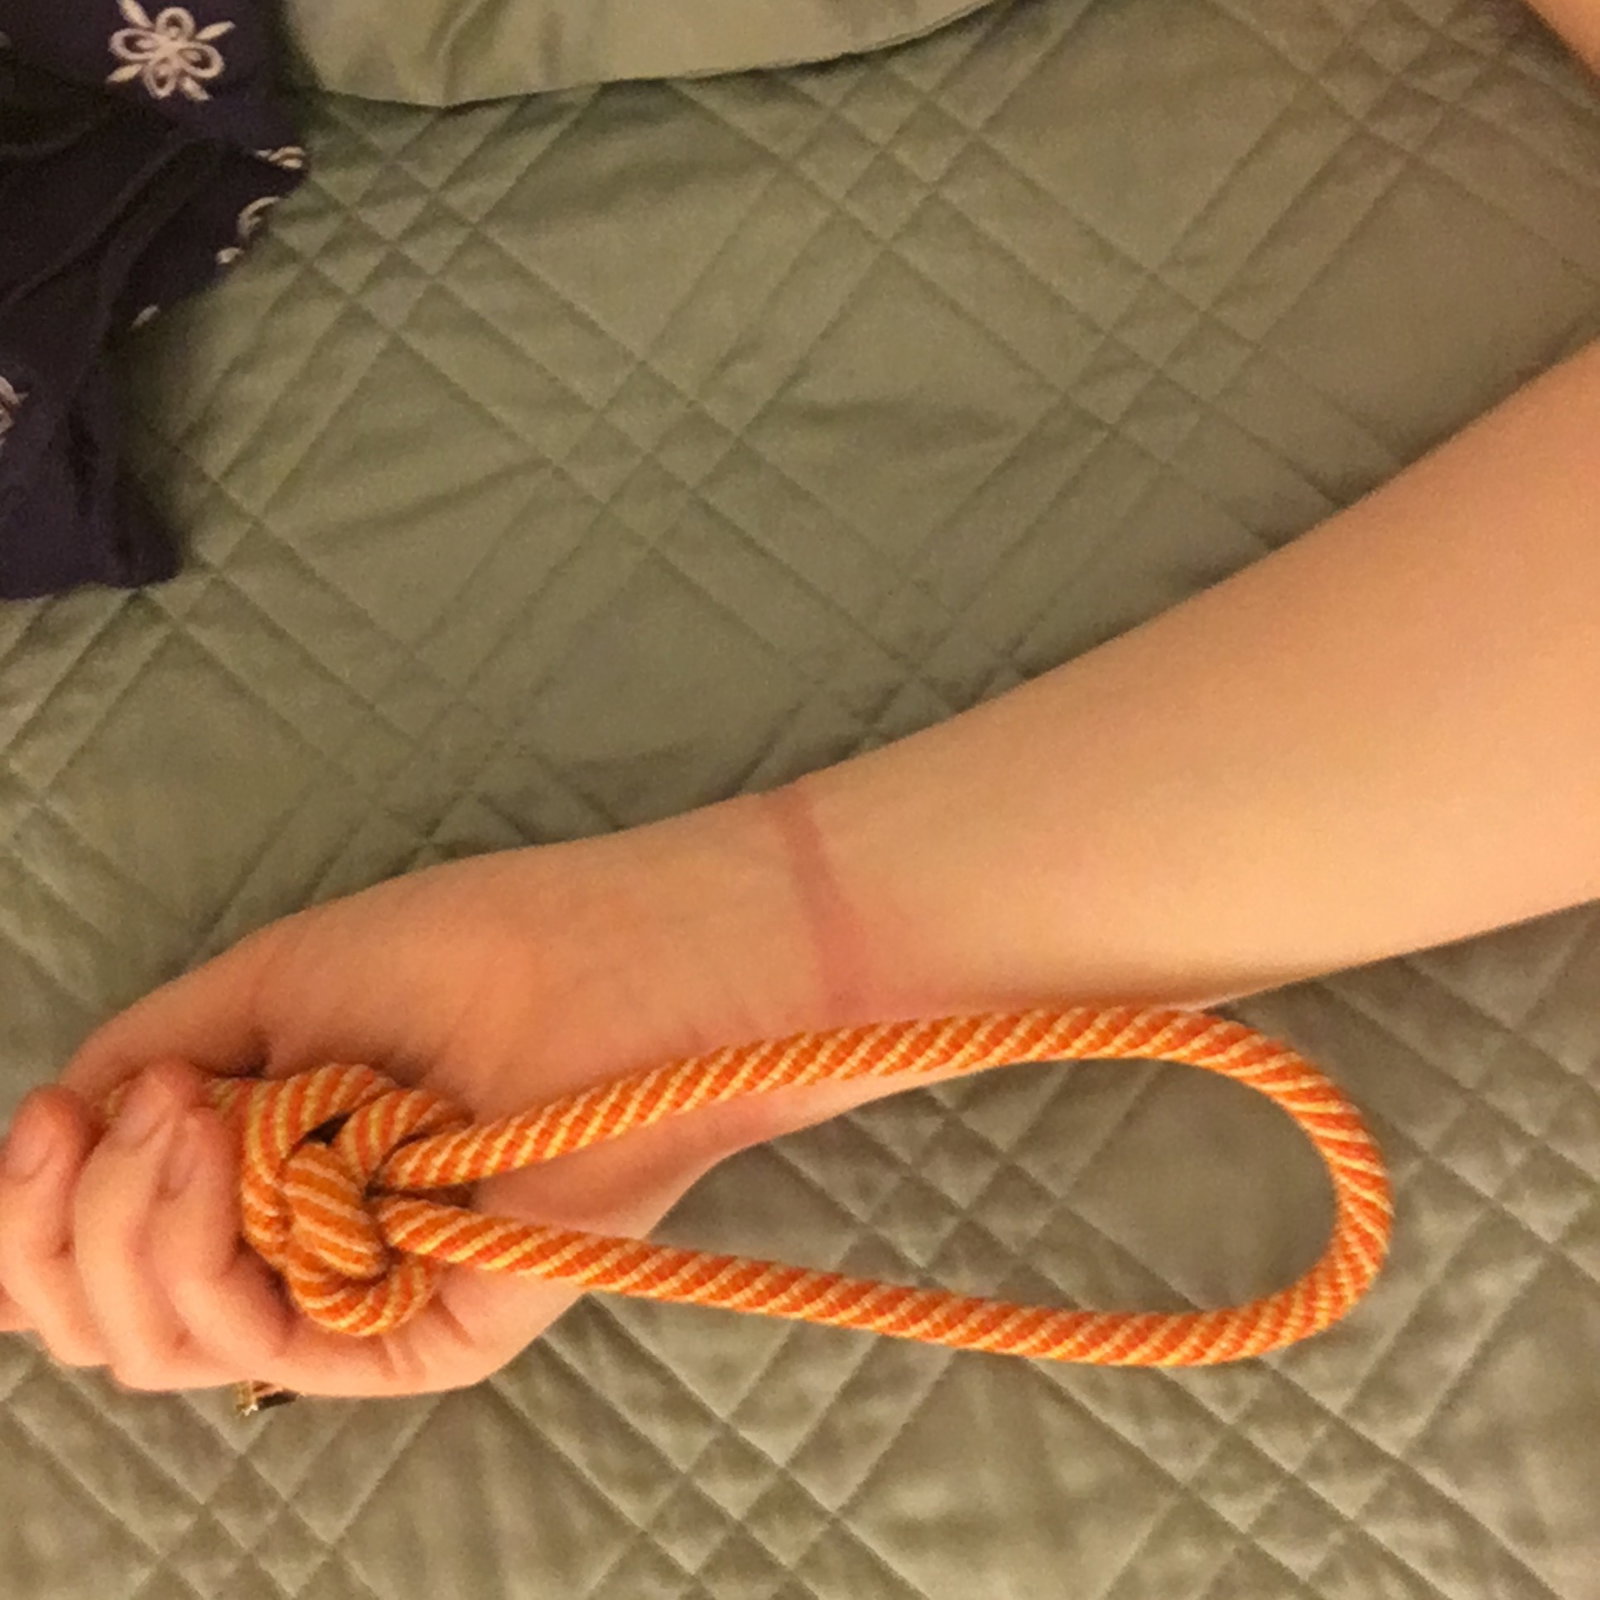 Photo by Mrs.Marston with the username @MrsMarston, who is a verified user,  December 31, 2019 at 1:55 AM. The post is about the topic Bondage and the text says 'Always a good time. #ropes'